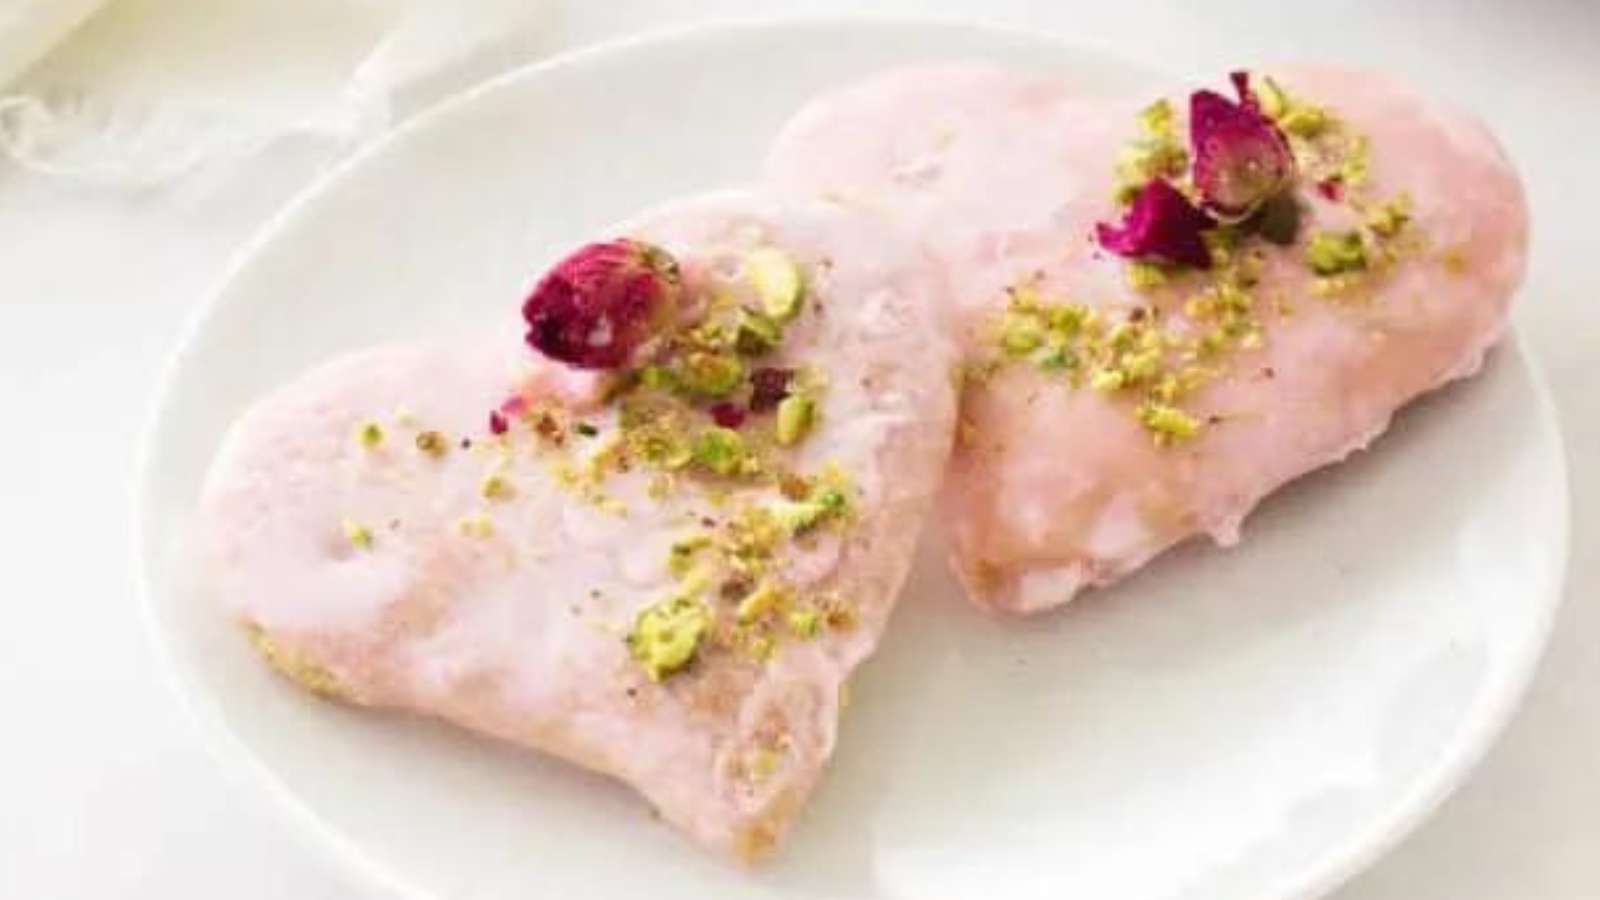 Two pink heart shaped cookies with pistachios on a plate.